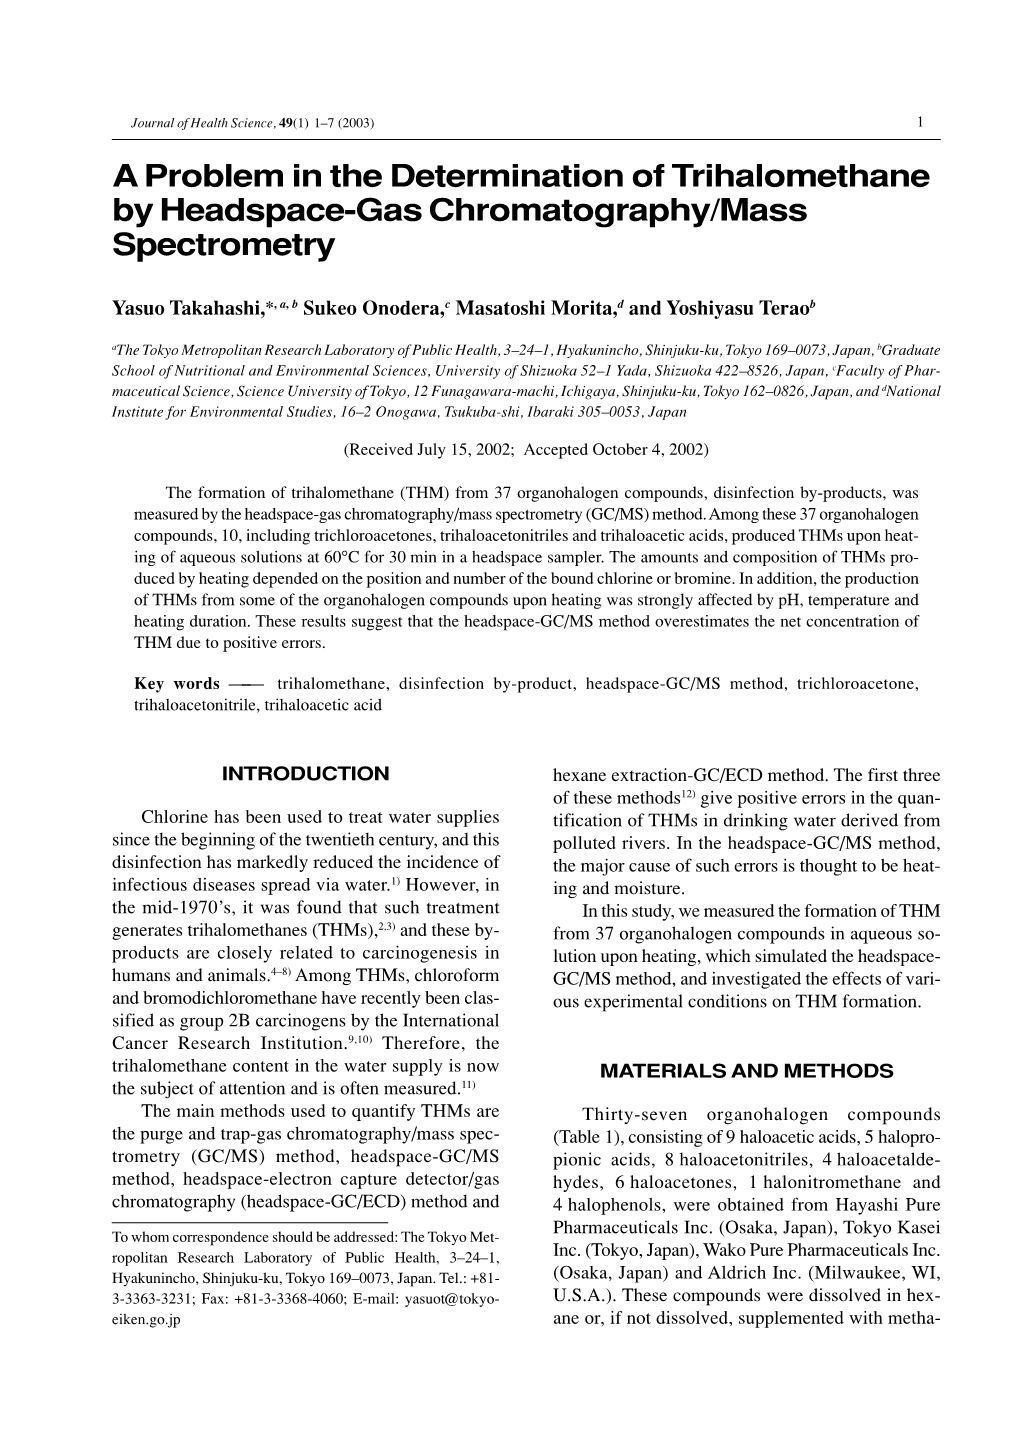 A Problem in the Determination of Trihalomethane by Headspace-Gas Chromatography/Mass Spectrometry